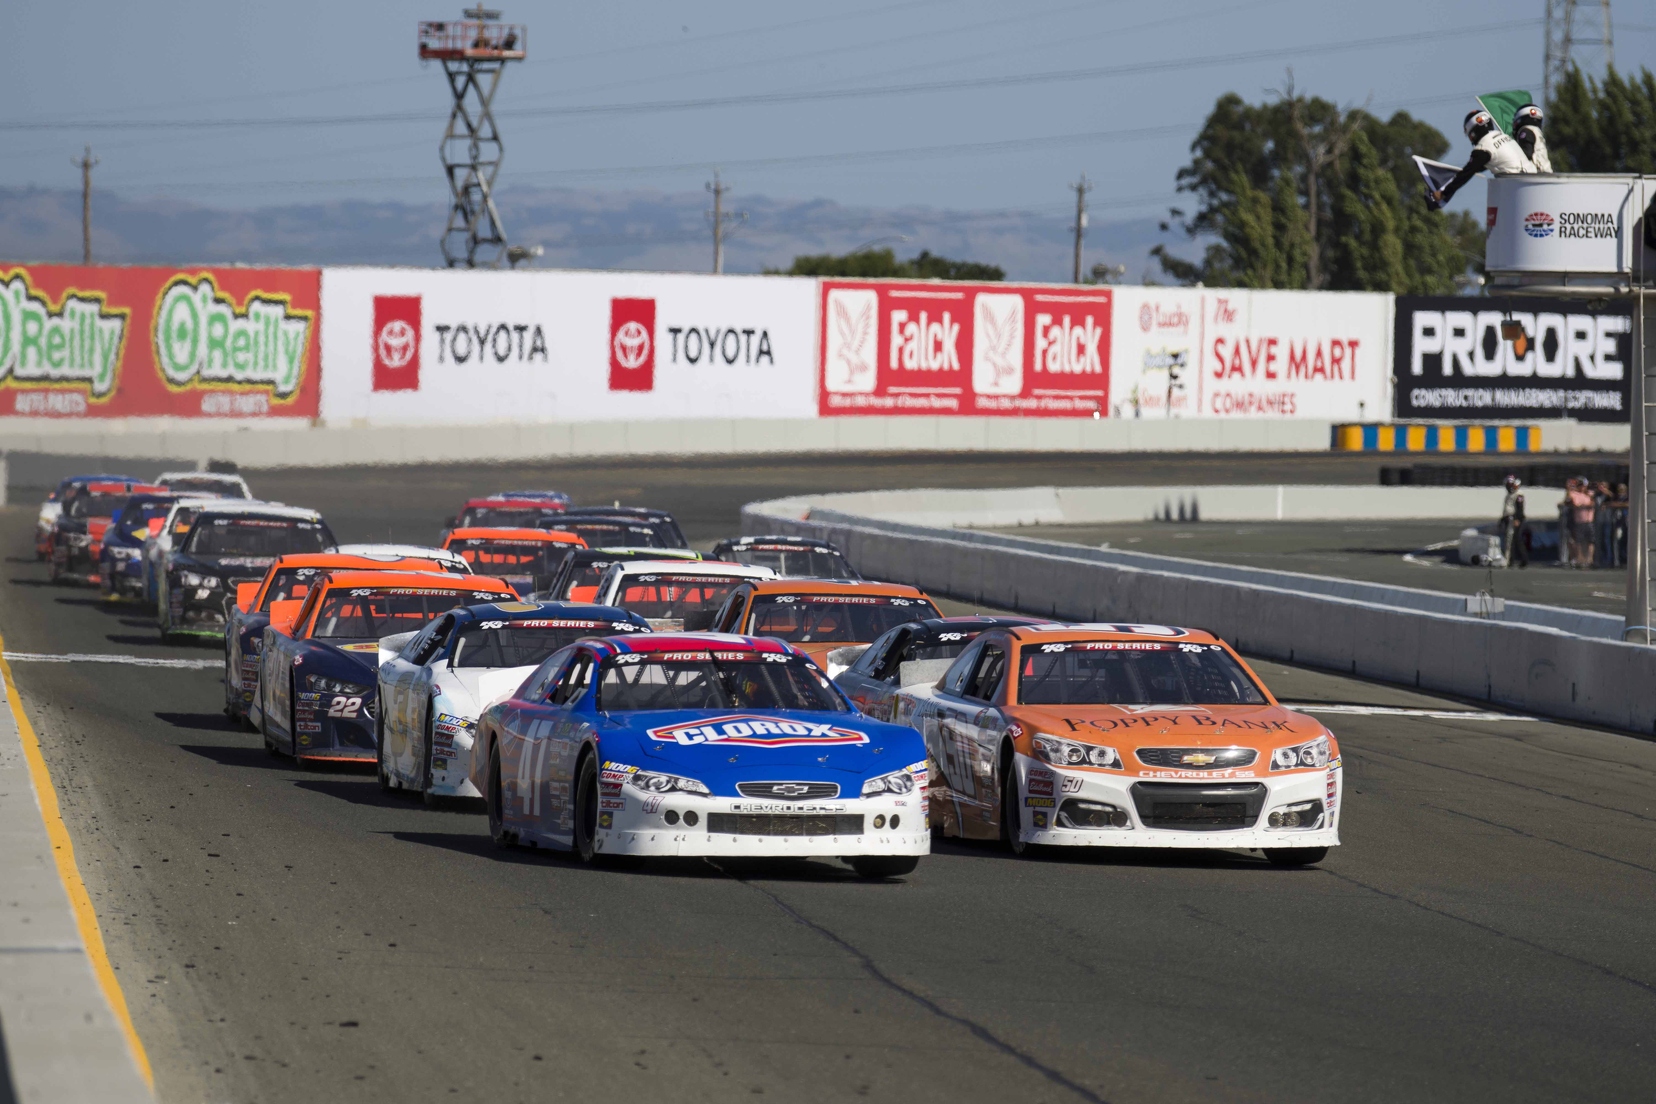 Ryan Preece (left) and Daniel Hemric (right) lead the field during one of the three overtime restarts. Photo courtesy of Patrick Sue-Chan for Speedway Media.